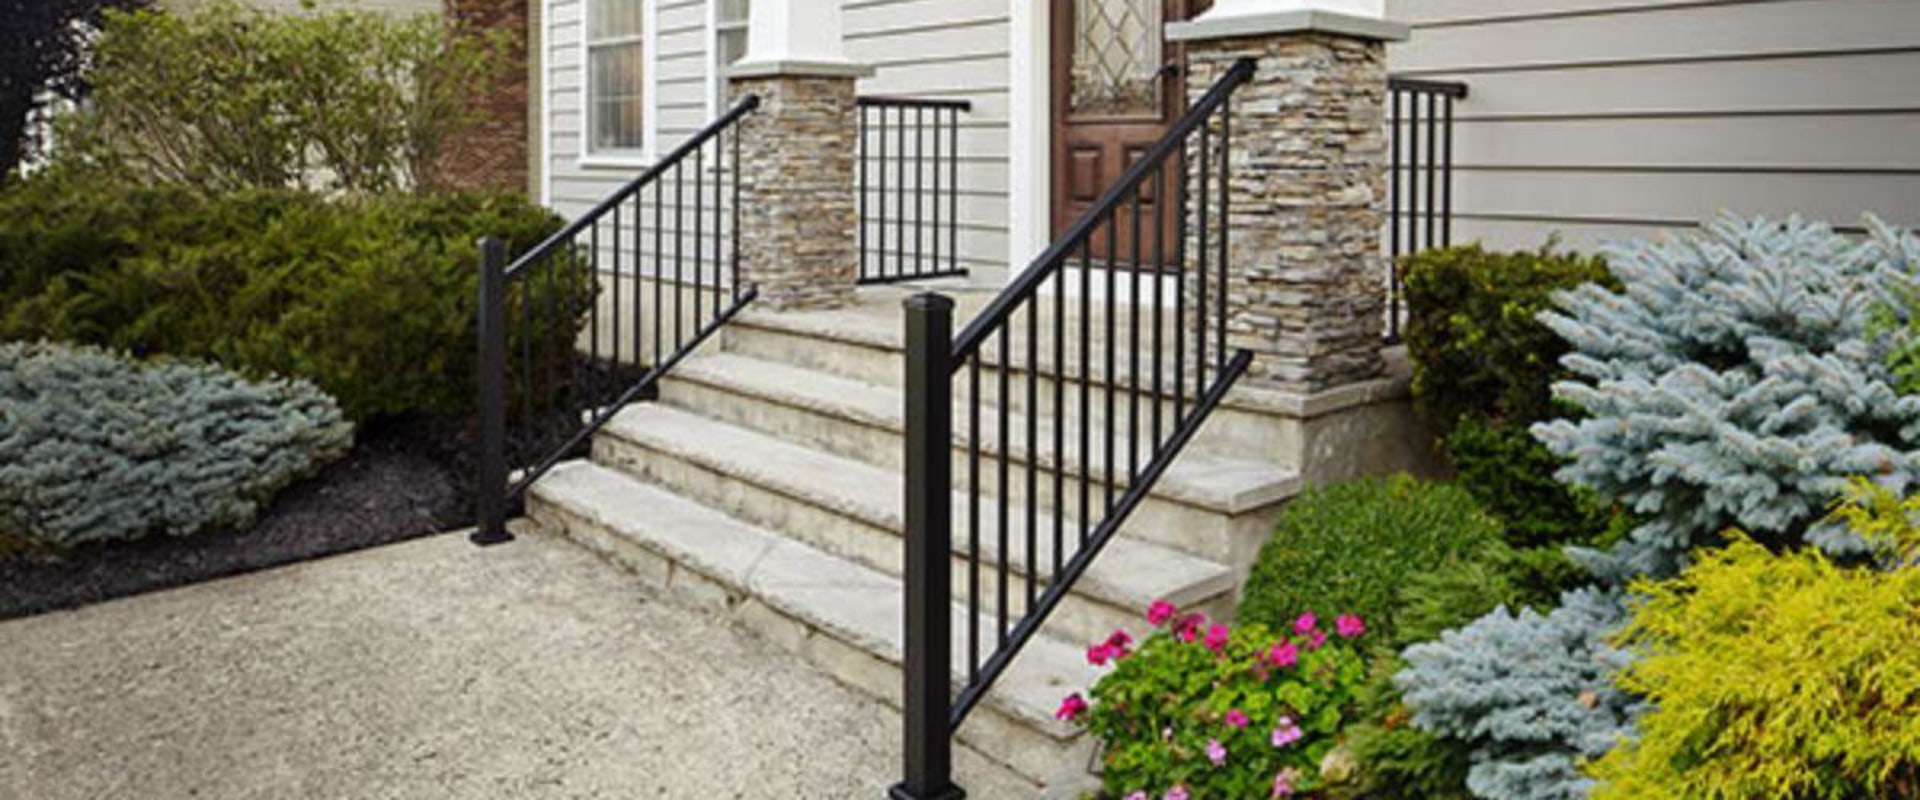 A Complete Guide to Installing Railings and Stairs for Your Outdoor Living Space